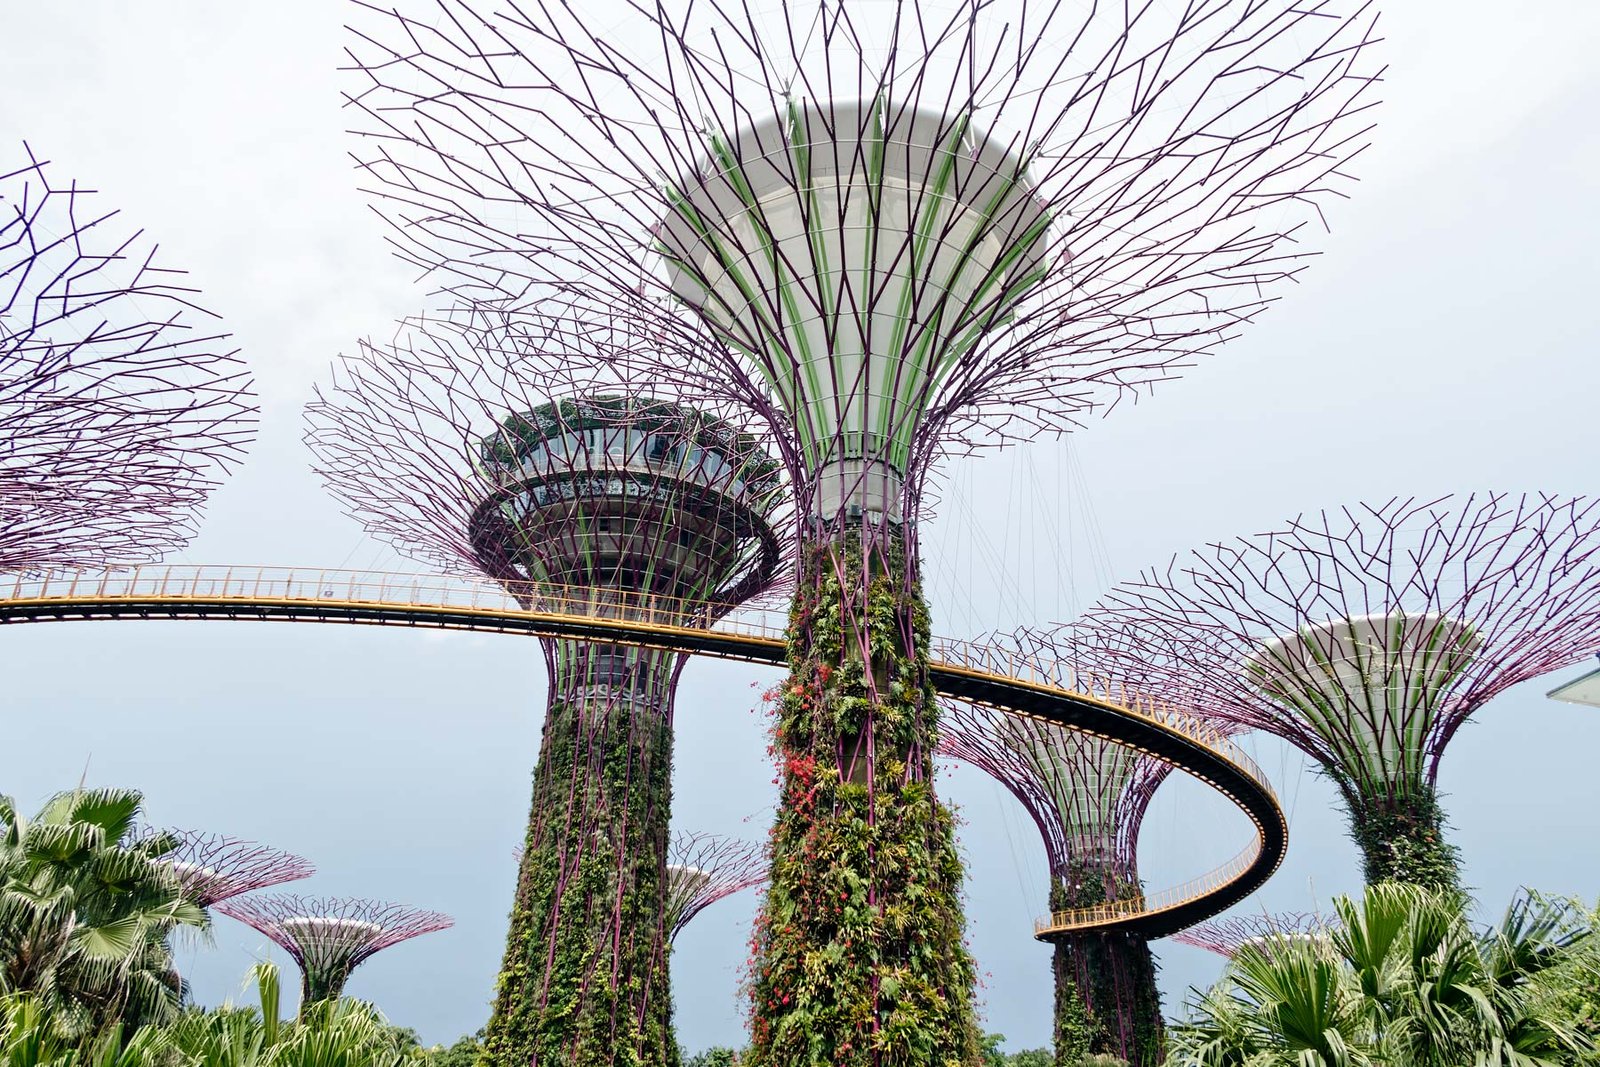 Ultimate Guide to My Favorite Places to Go, Eat & Stay in Singapore